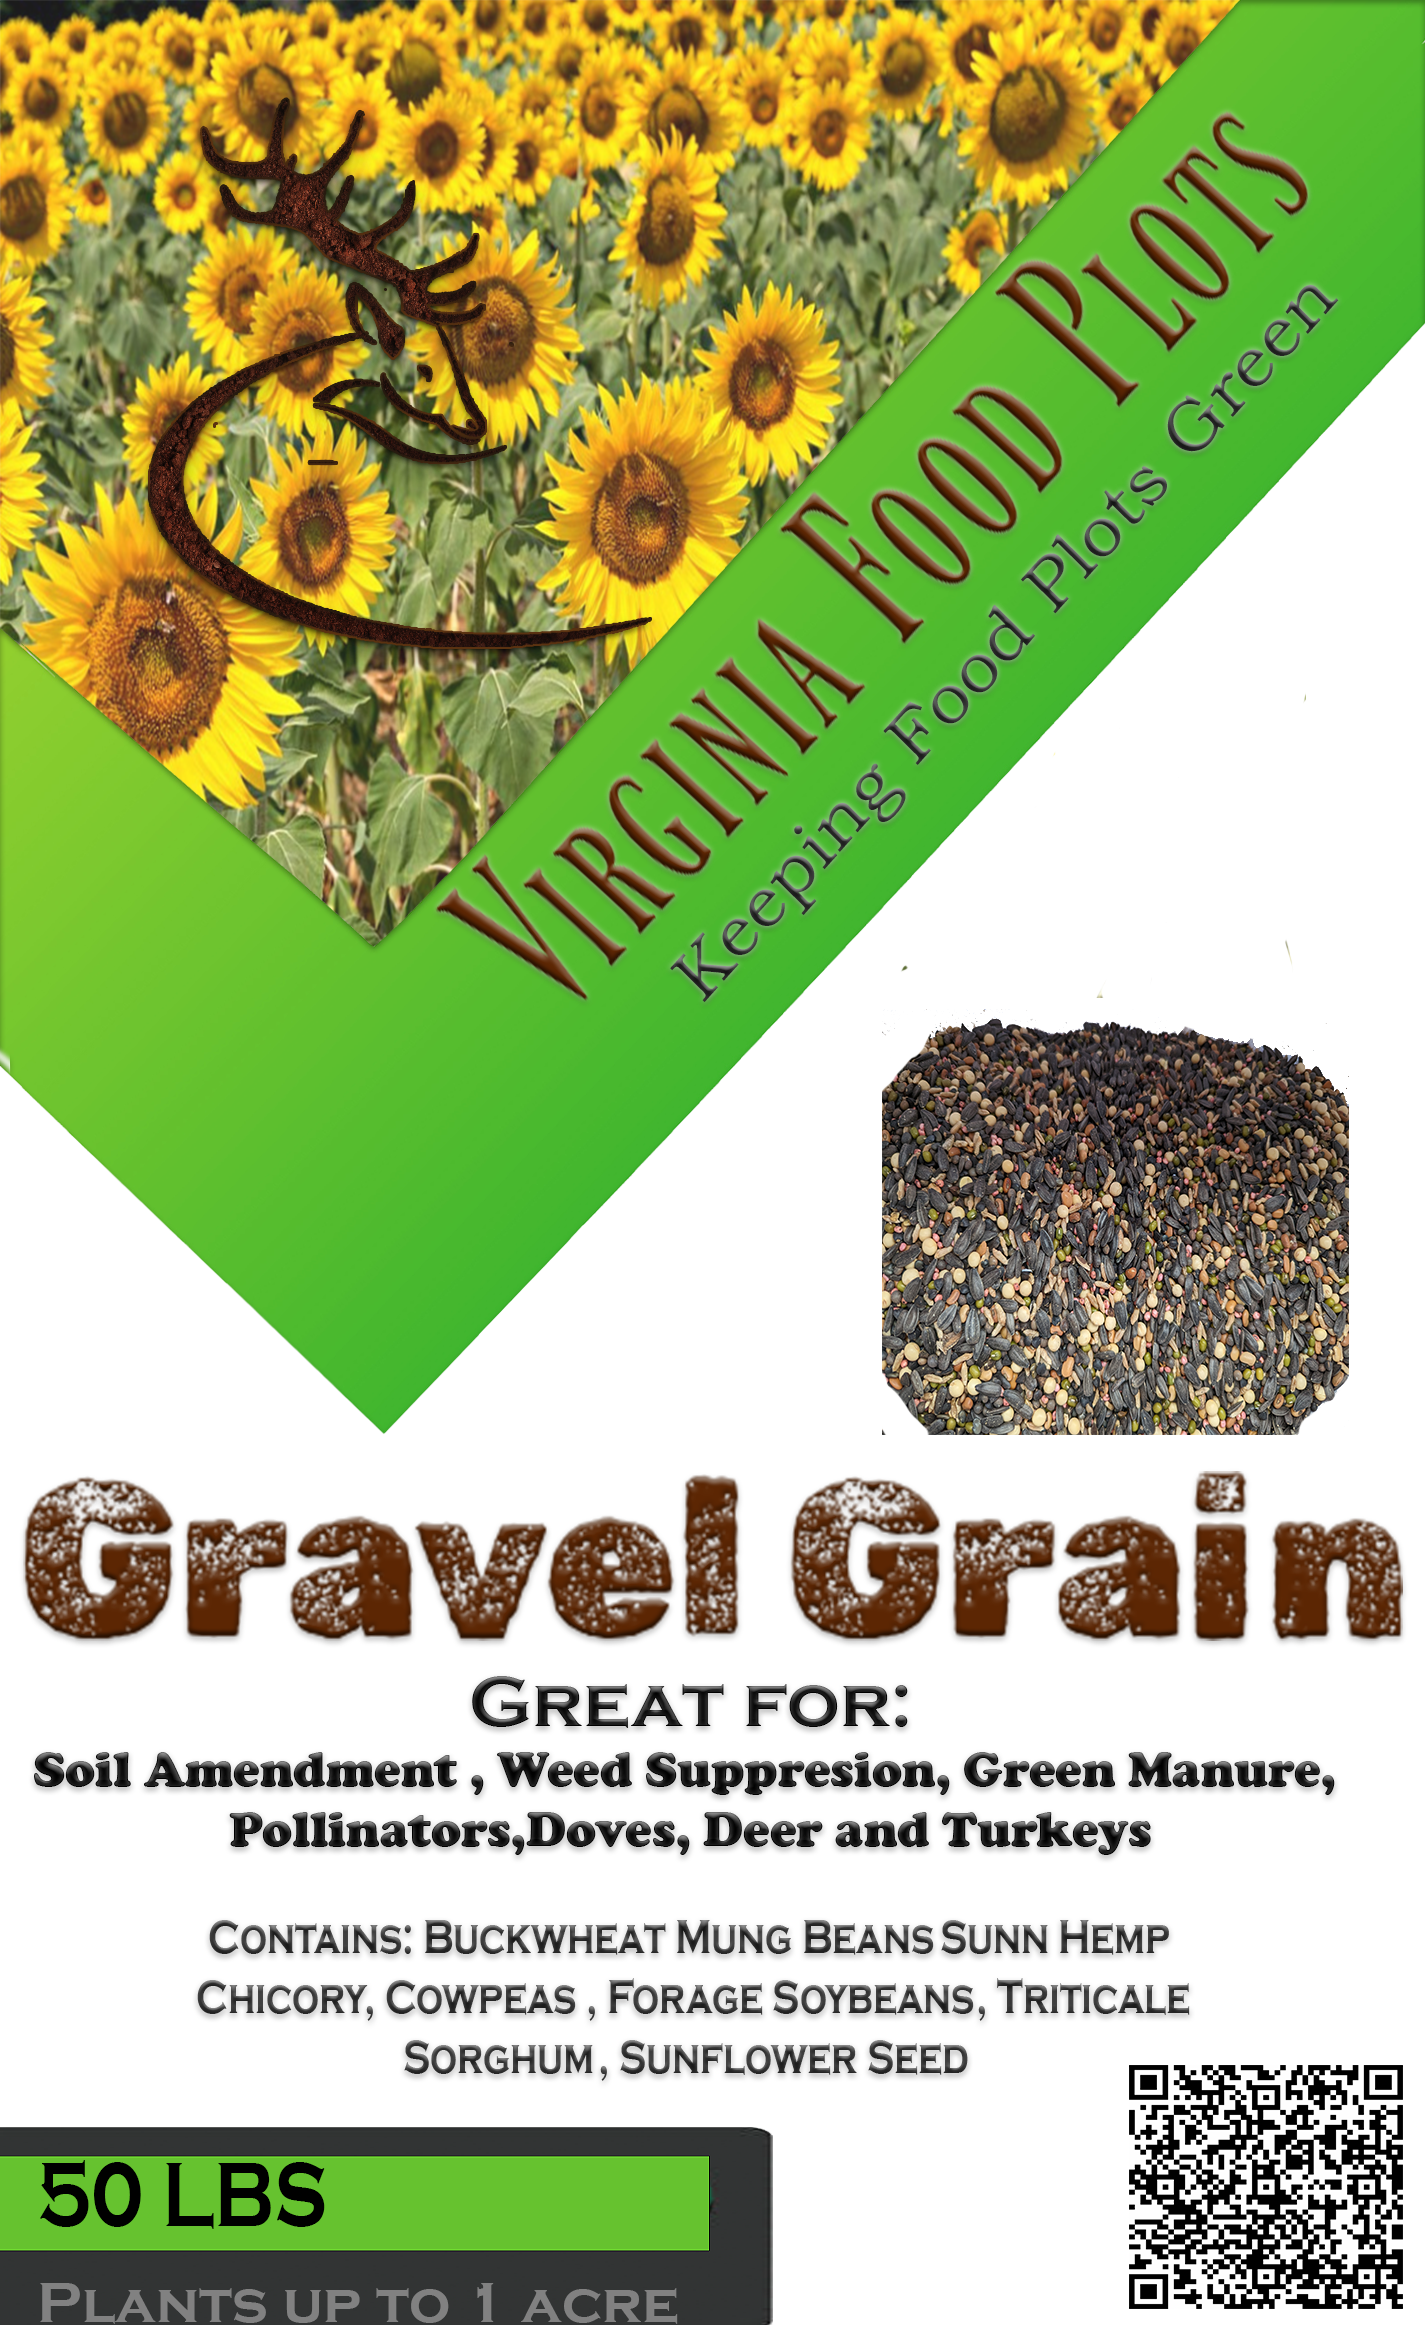 Gravel Grain For Spring is Coming Soon!